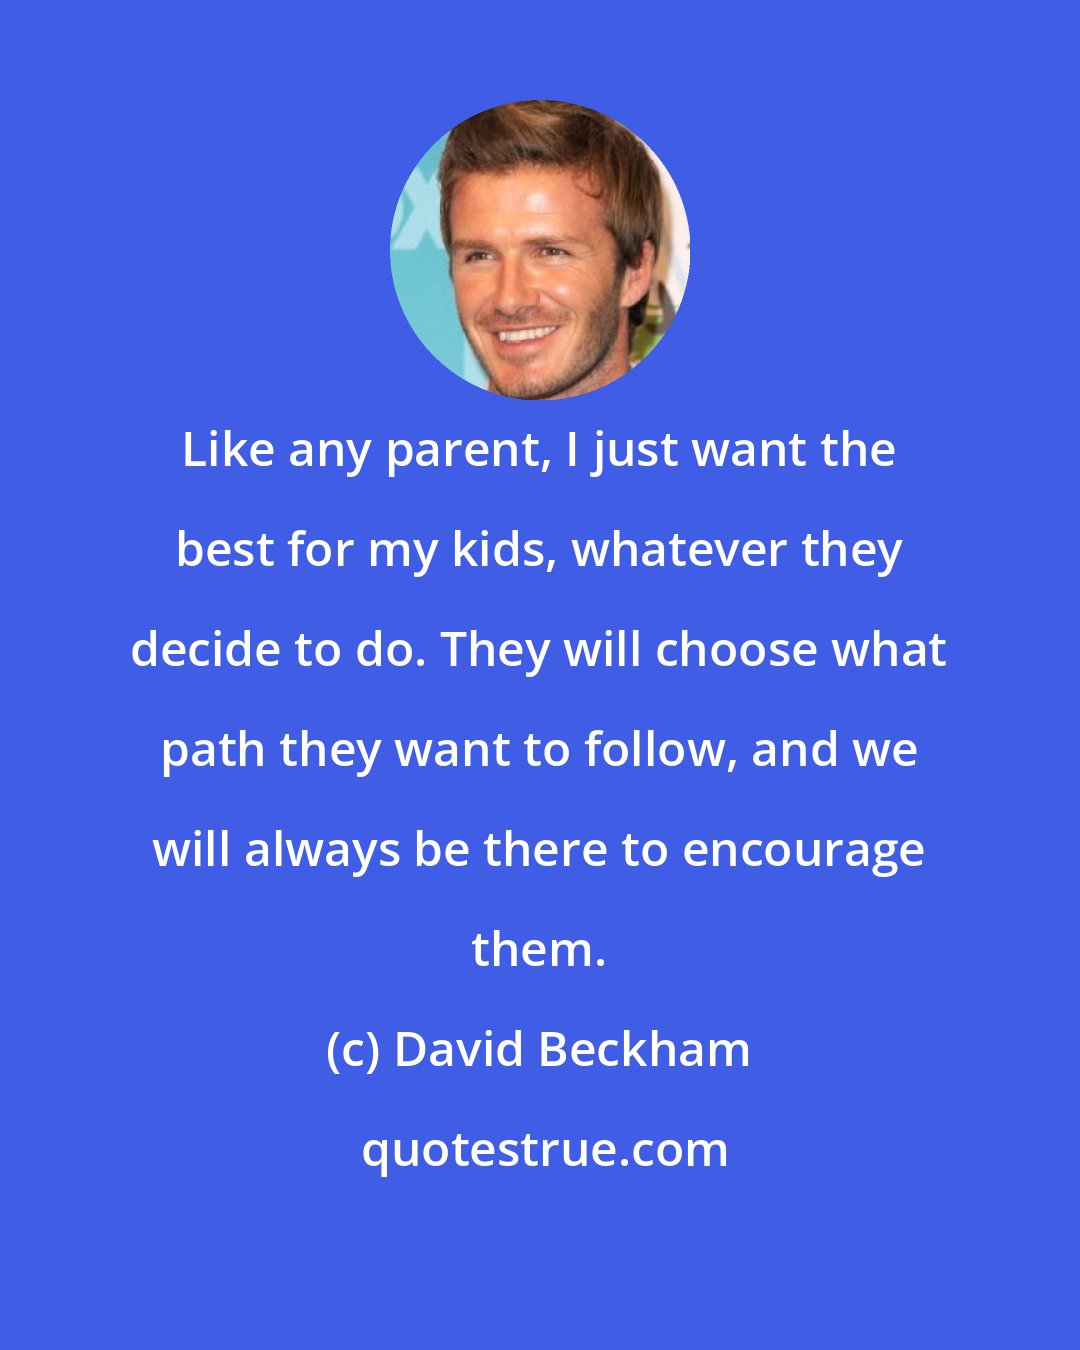 David Beckham: Like any parent, I just want the best for my kids, whatever they decide to do. They will choose what path they want to follow, and we will always be there to encourage them.